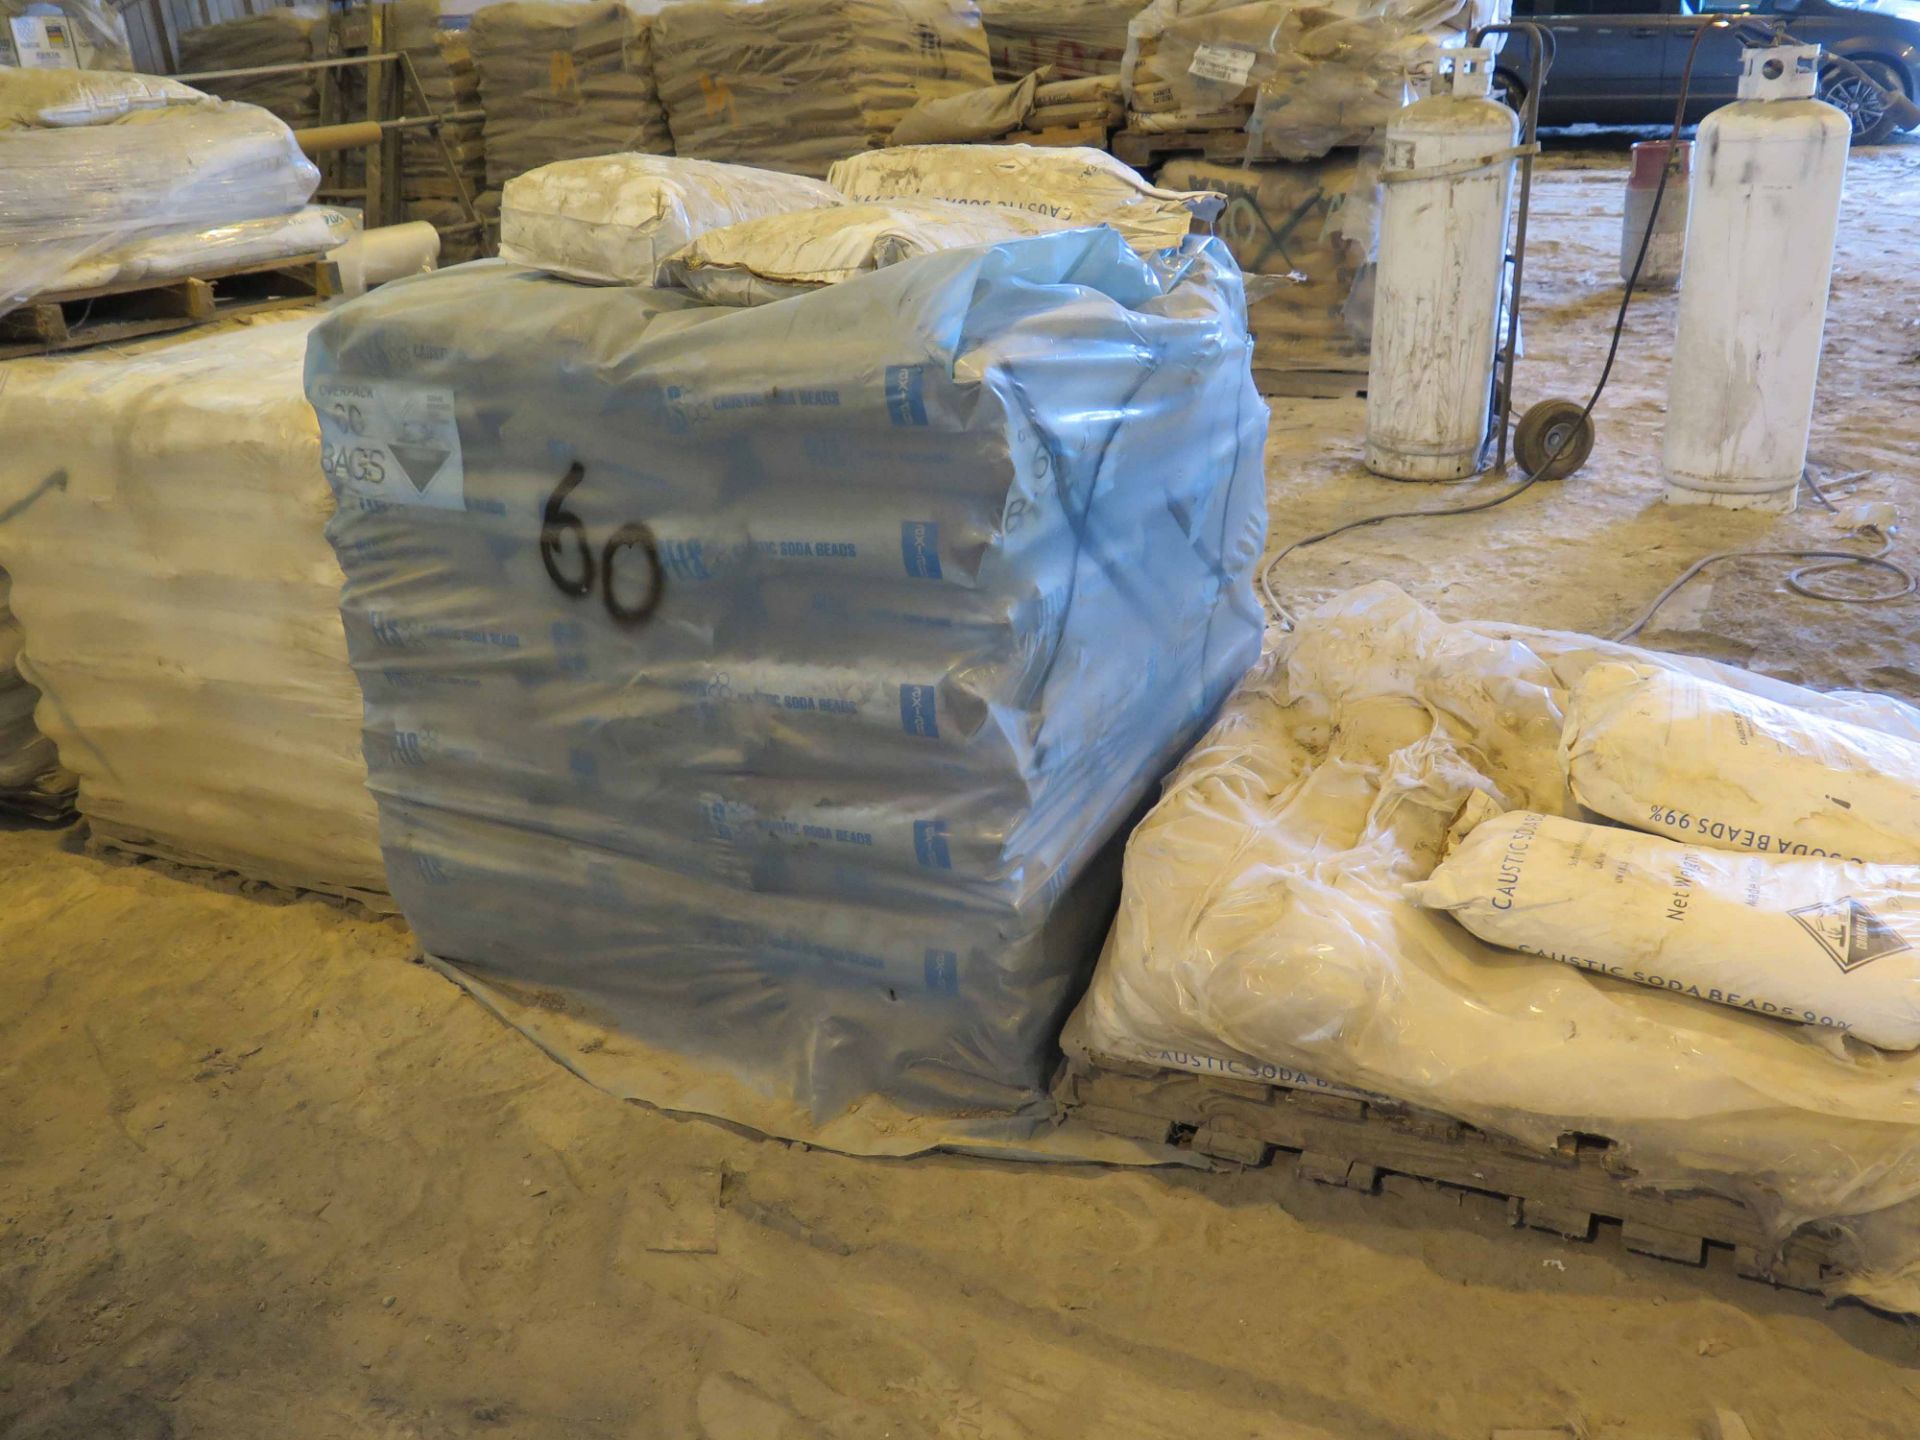 LOT OF CAUSTIC SODA BEADS (on 2-1/2 pallets) (Location #1: 374 Walter White Road, Trinity, TX - Image 2 of 2